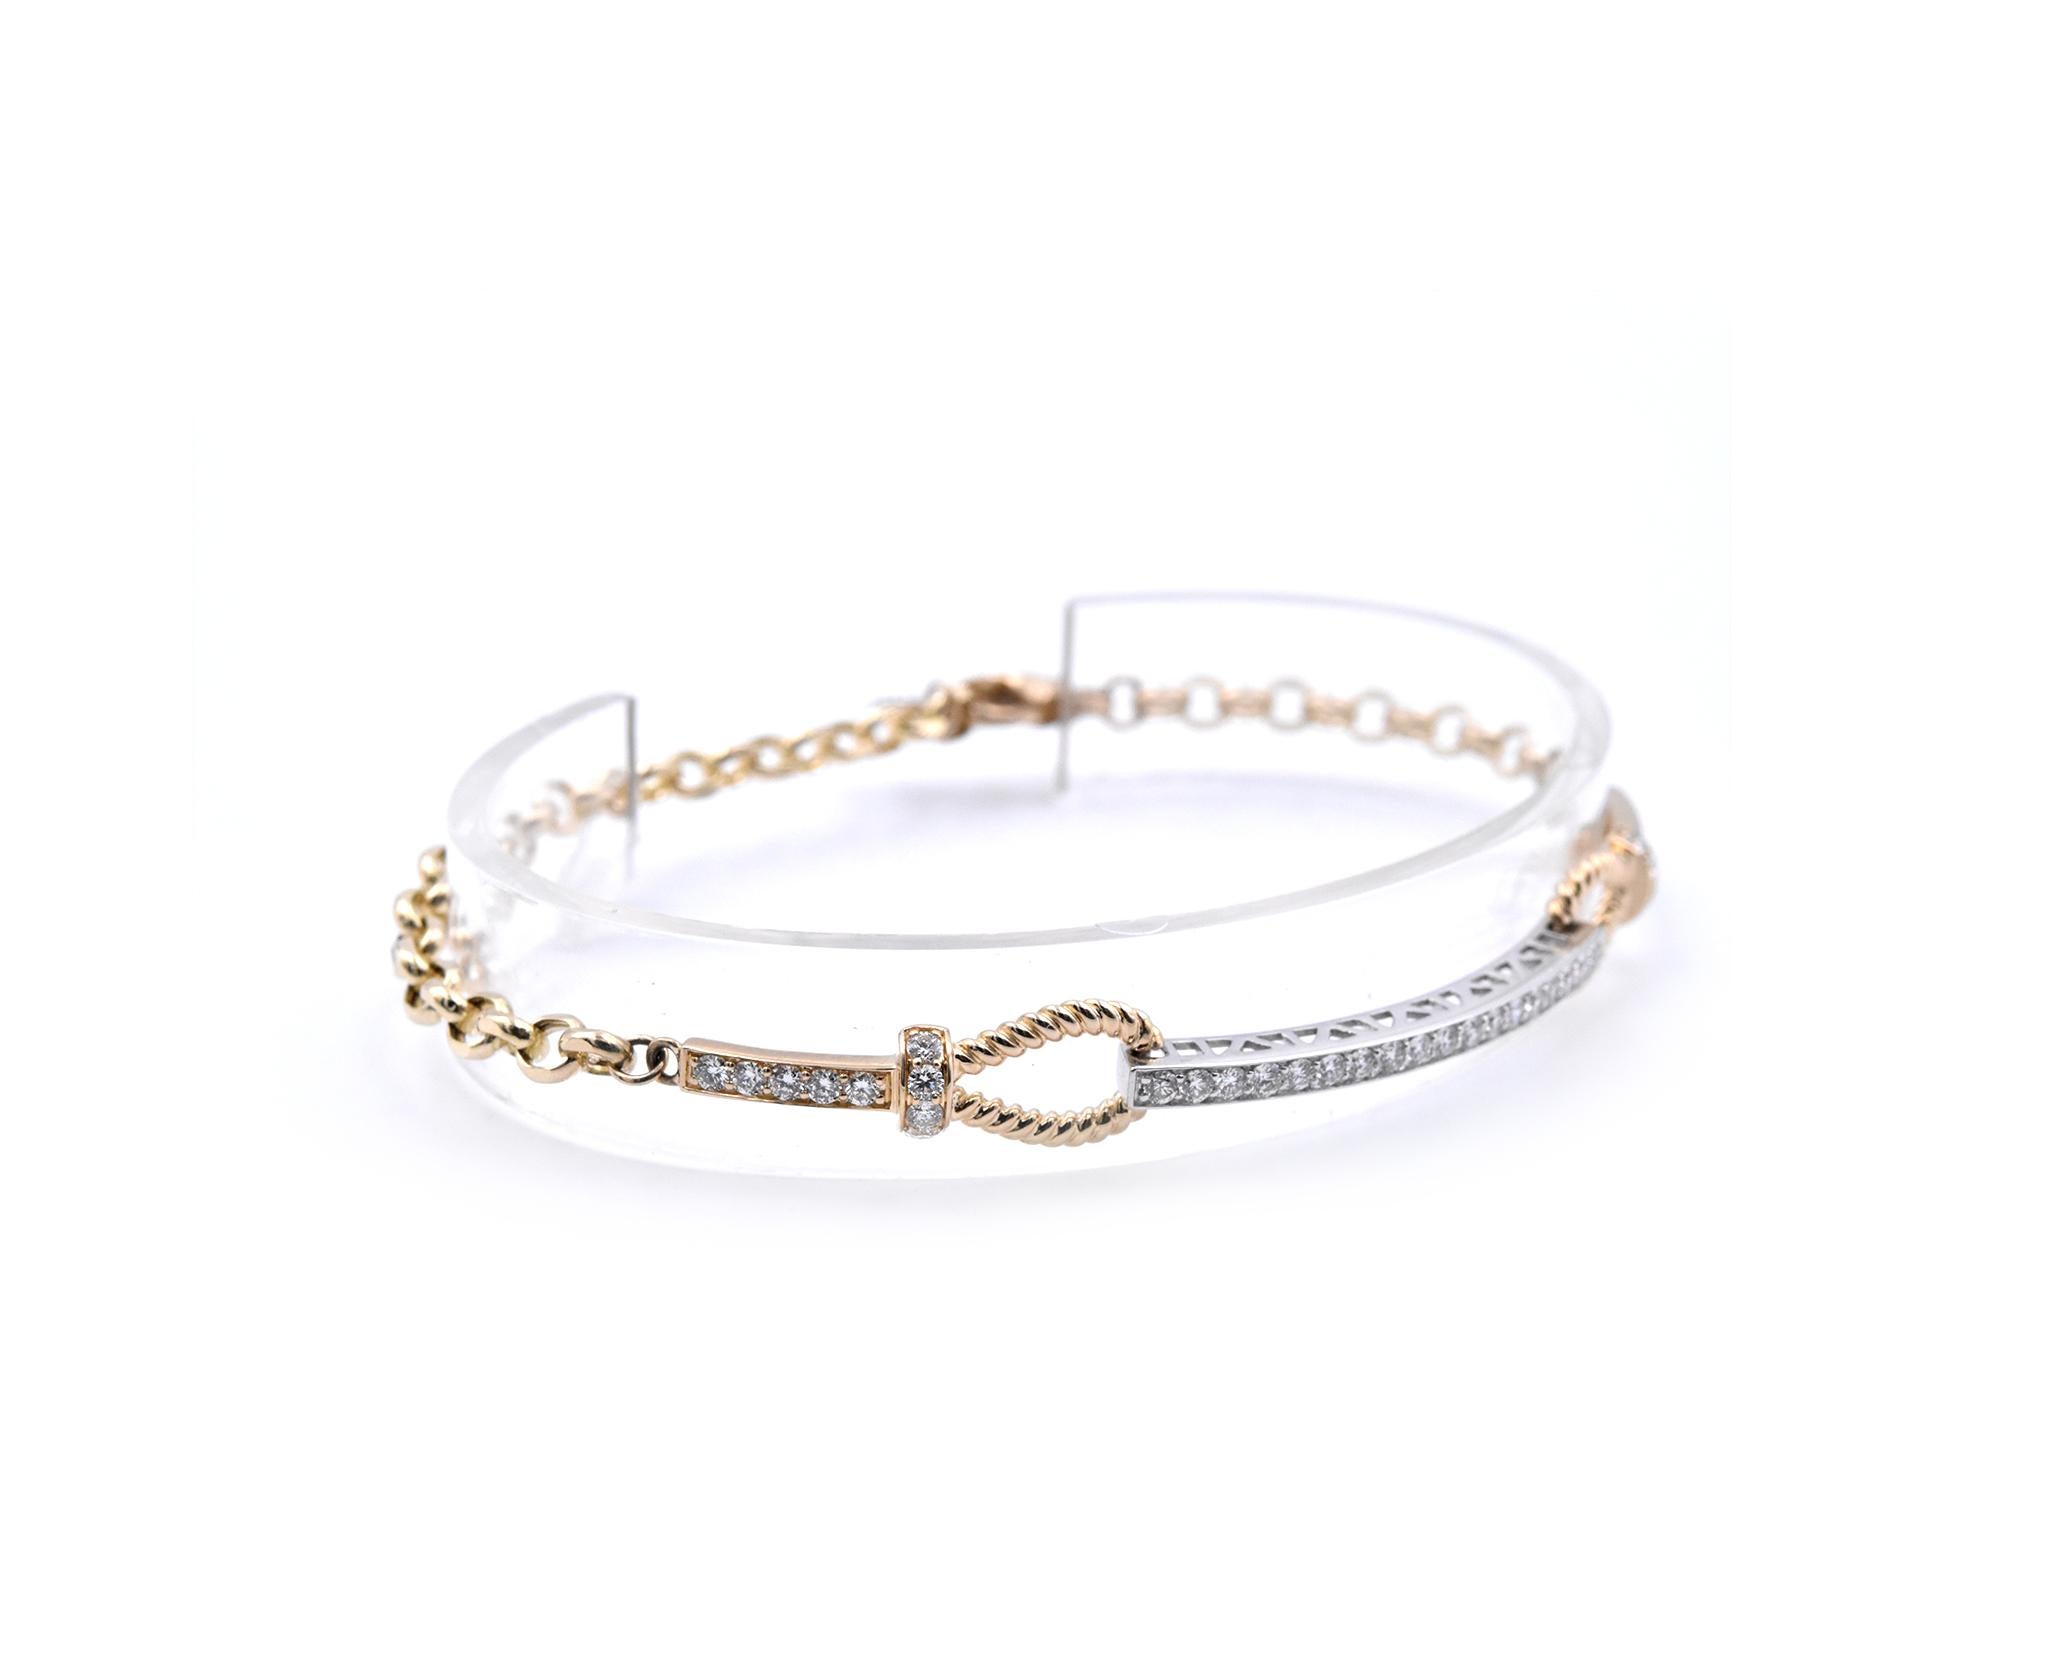 Material: 14k white and yellow gold
Diamonds: 36 round brilliant cuts = 1.00cttw
Color: G-H
Clarity: VS
Dimensions: bracelet measures 7 ½ inches in length
Weight: 7.55 grams
